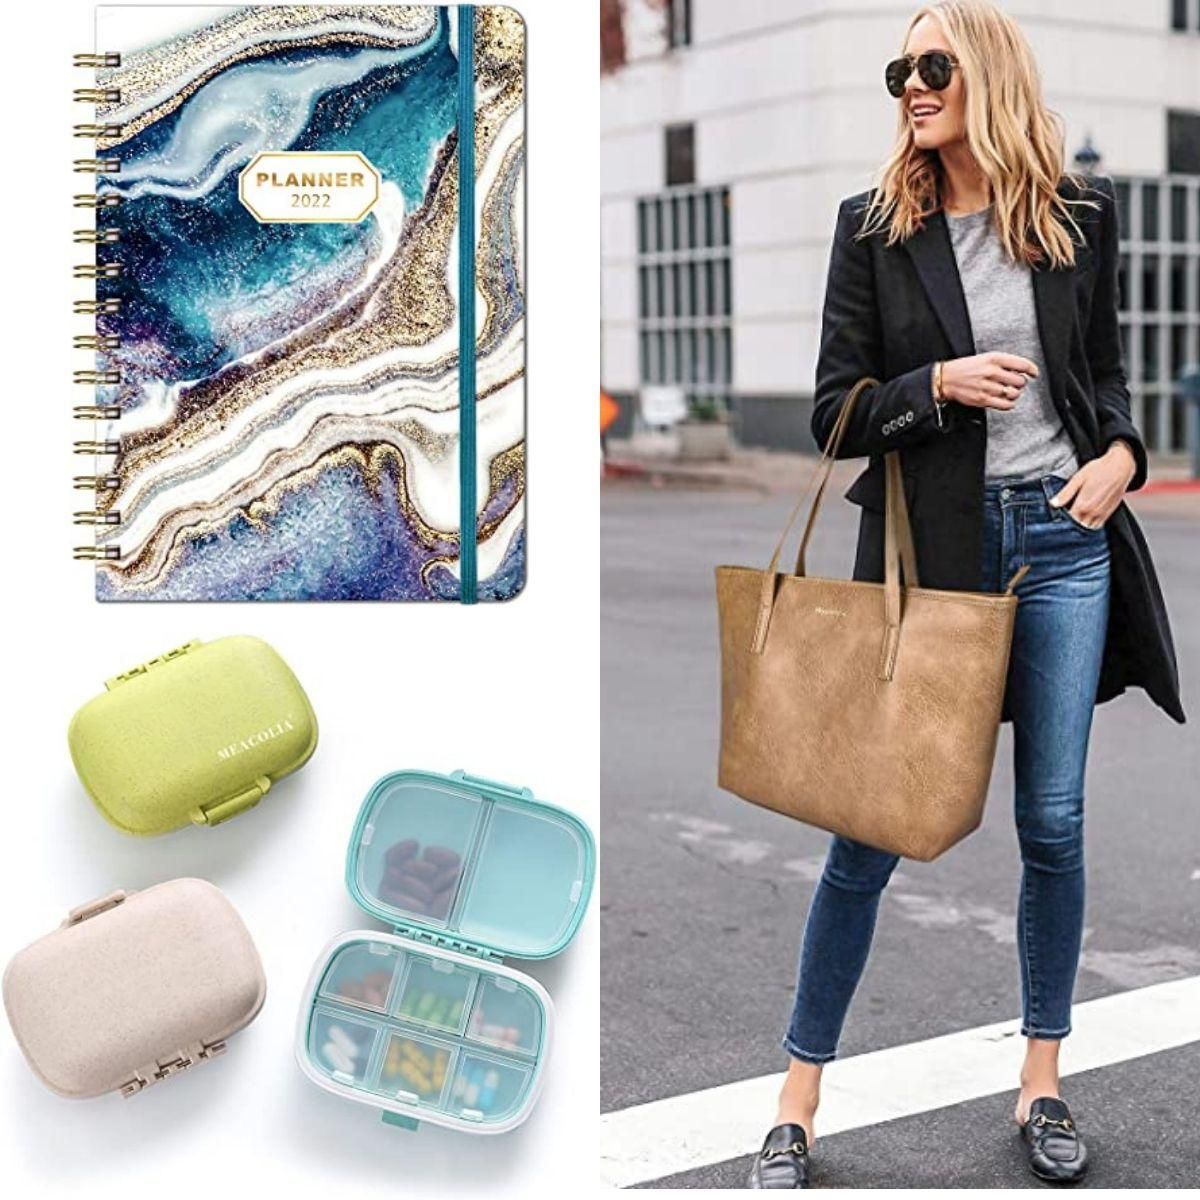 Returning to the Office, These are the 35 Must-Have Things to Take With You